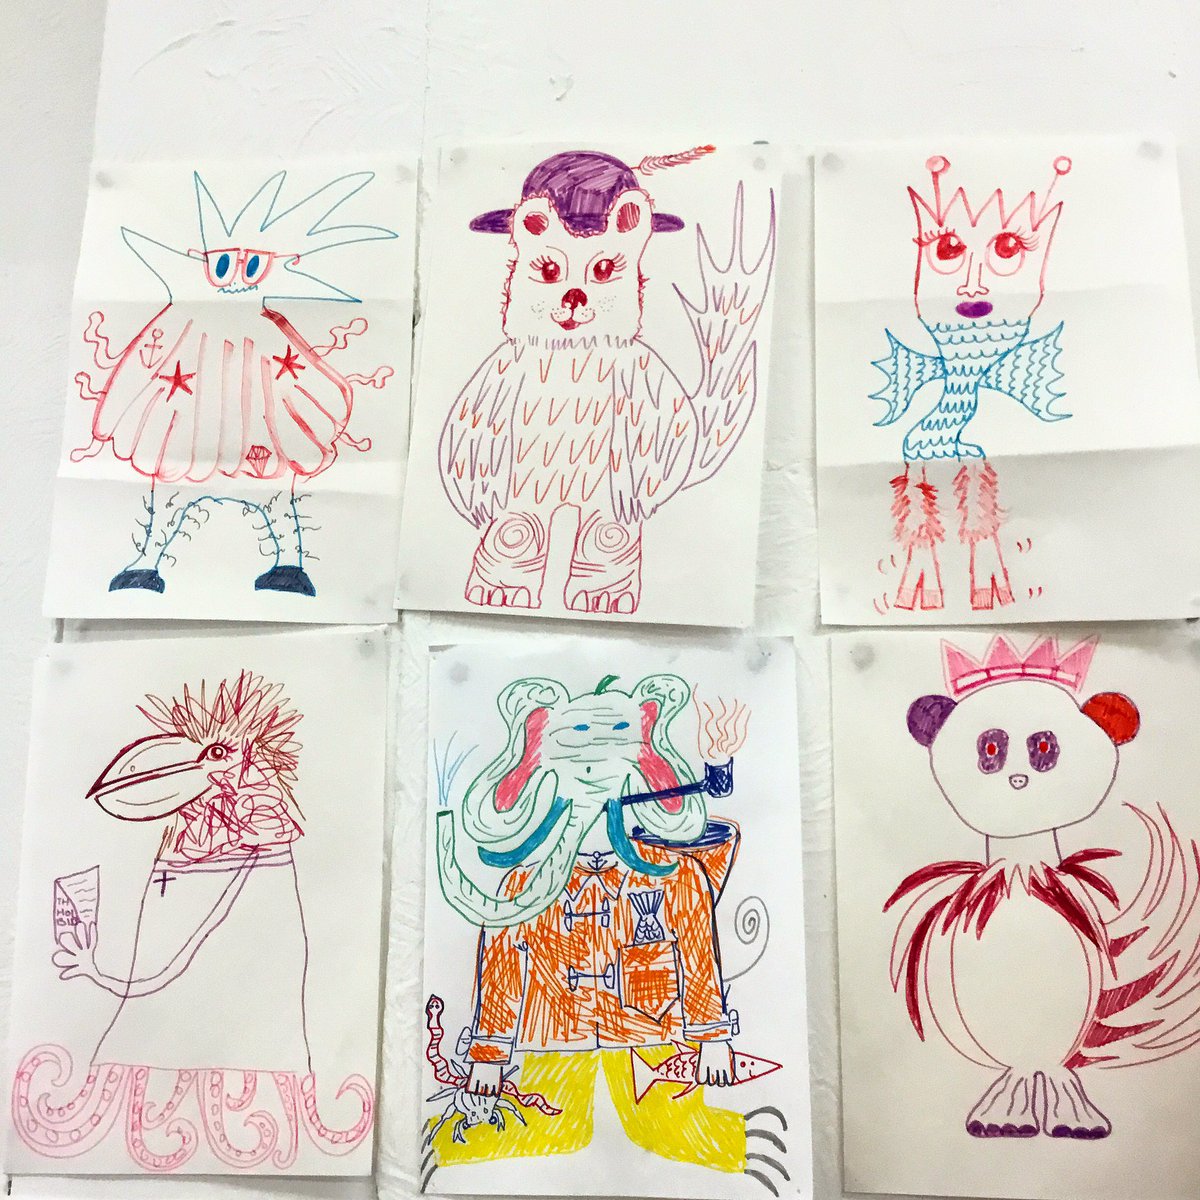 #youngcarers#artsessions#groupart#mashups#drawing#mythologicalcreatures#youthwork#drawingandtalking#havantyoungcarers#artherapy#youcare#wecare